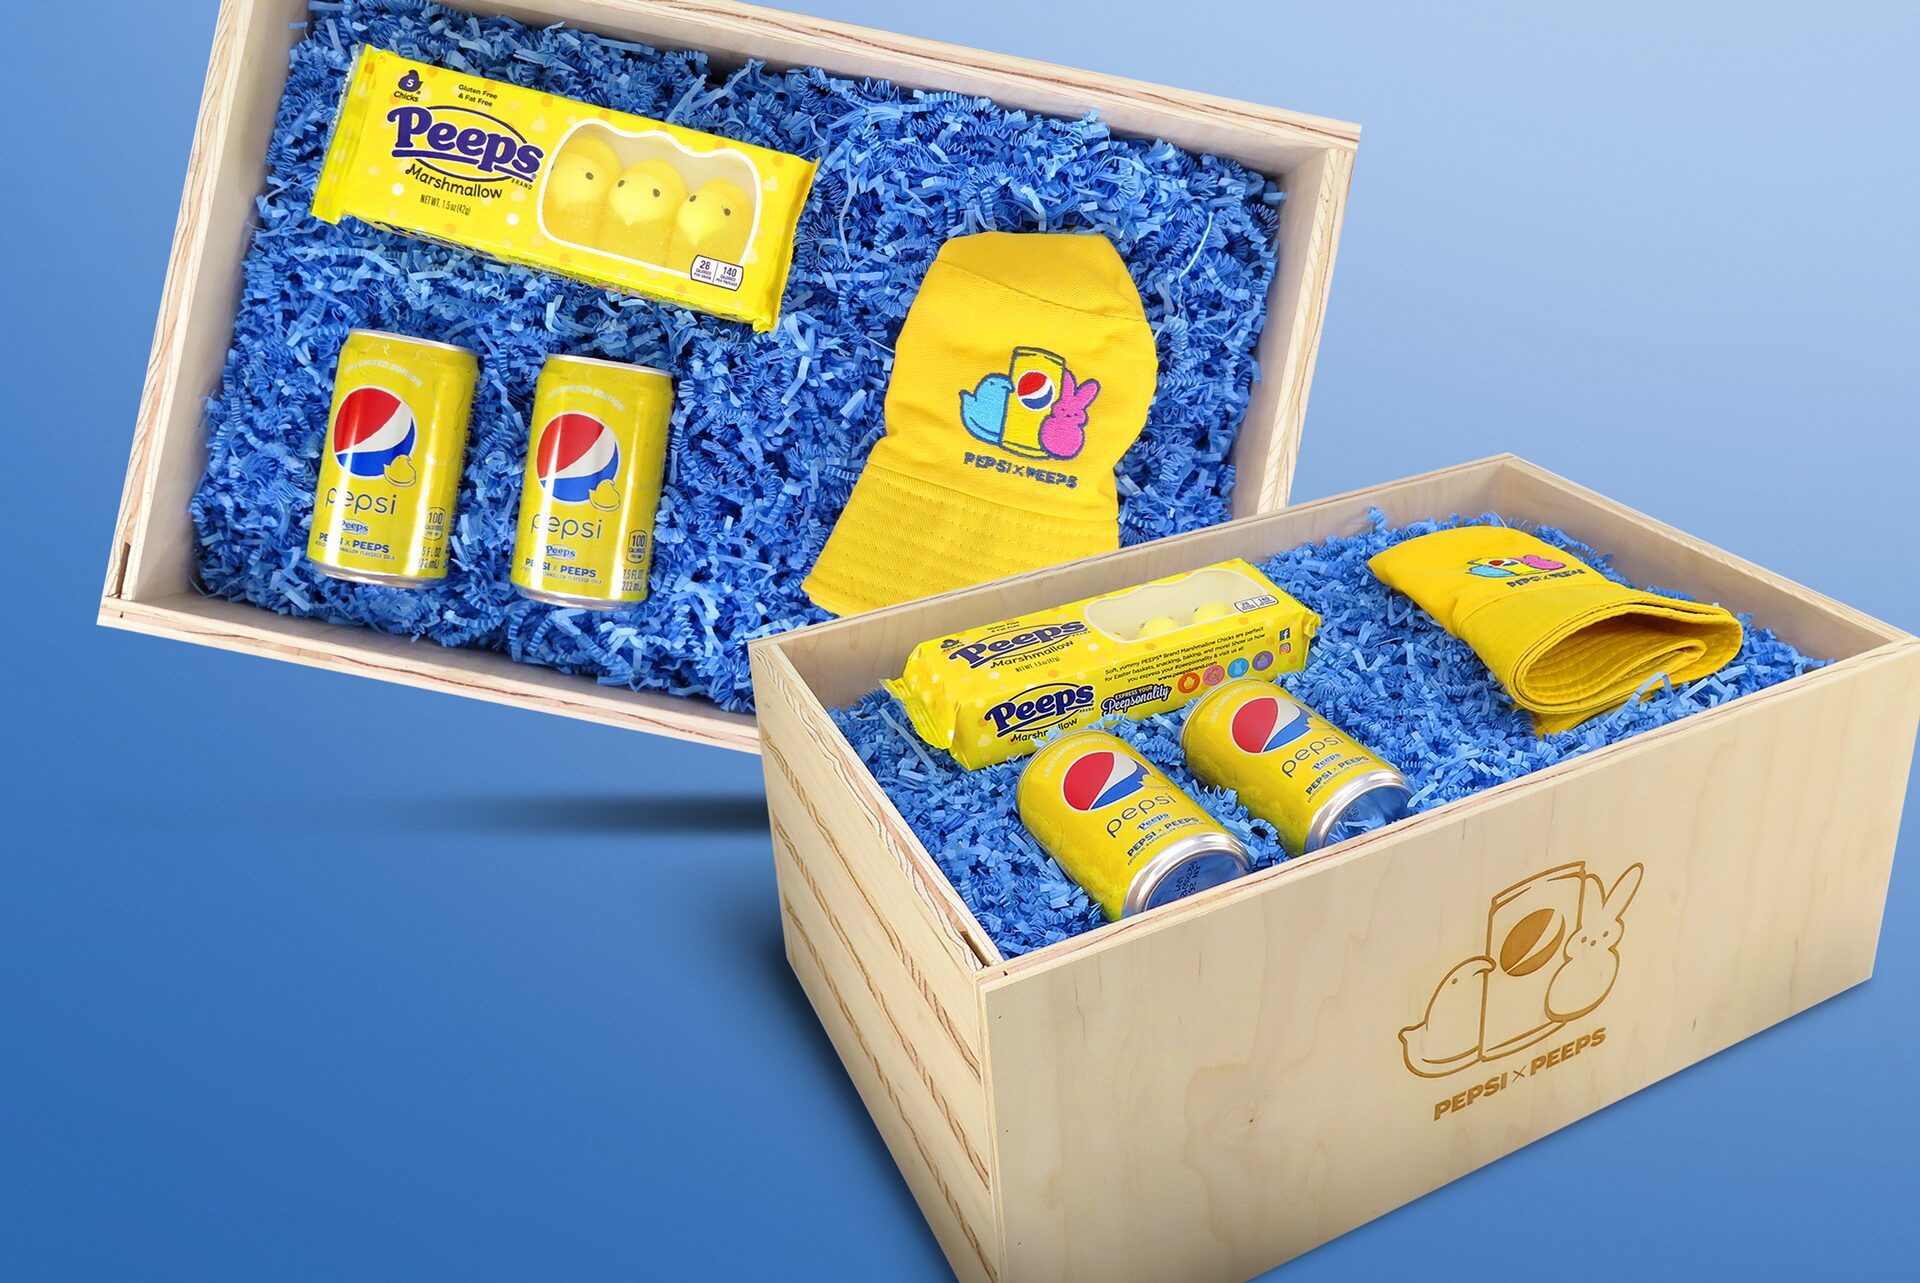 Beauty shot of an influencer marketing unboxing experience for the limited edition collaboration between pepsi and Peeps.